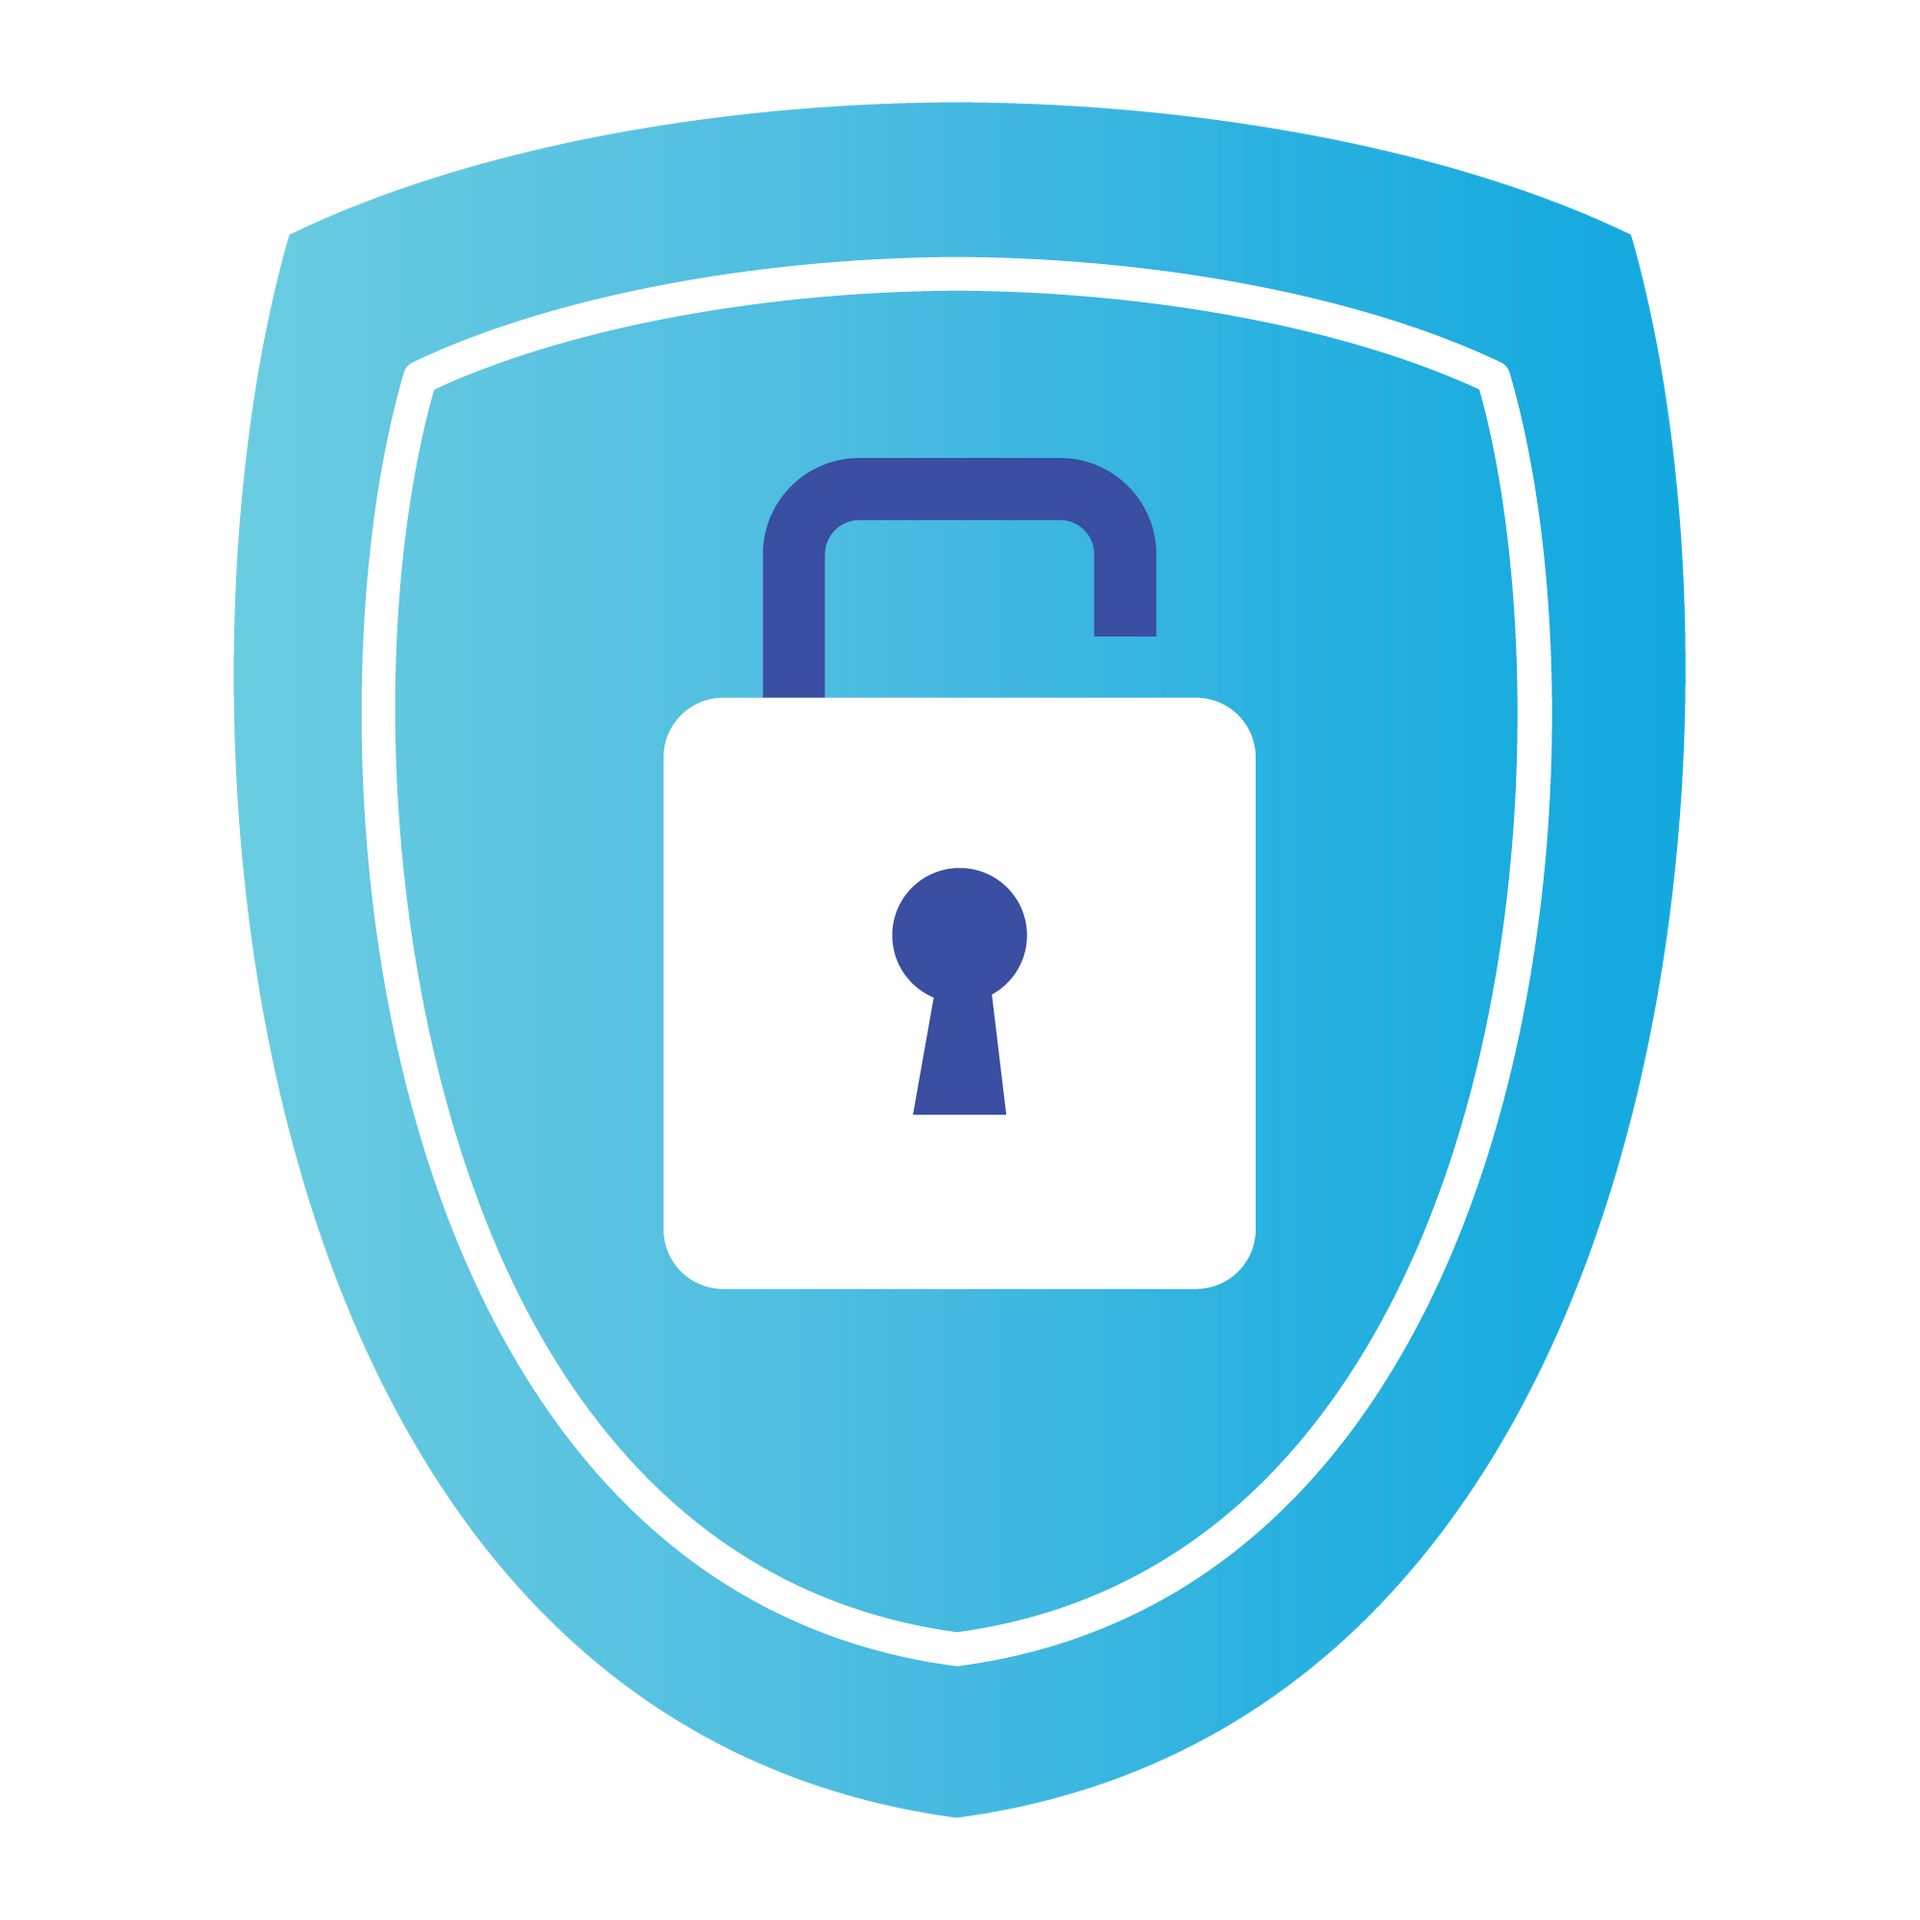 Privacy policy icon with a white and dark blue lock on a gradient blue background.